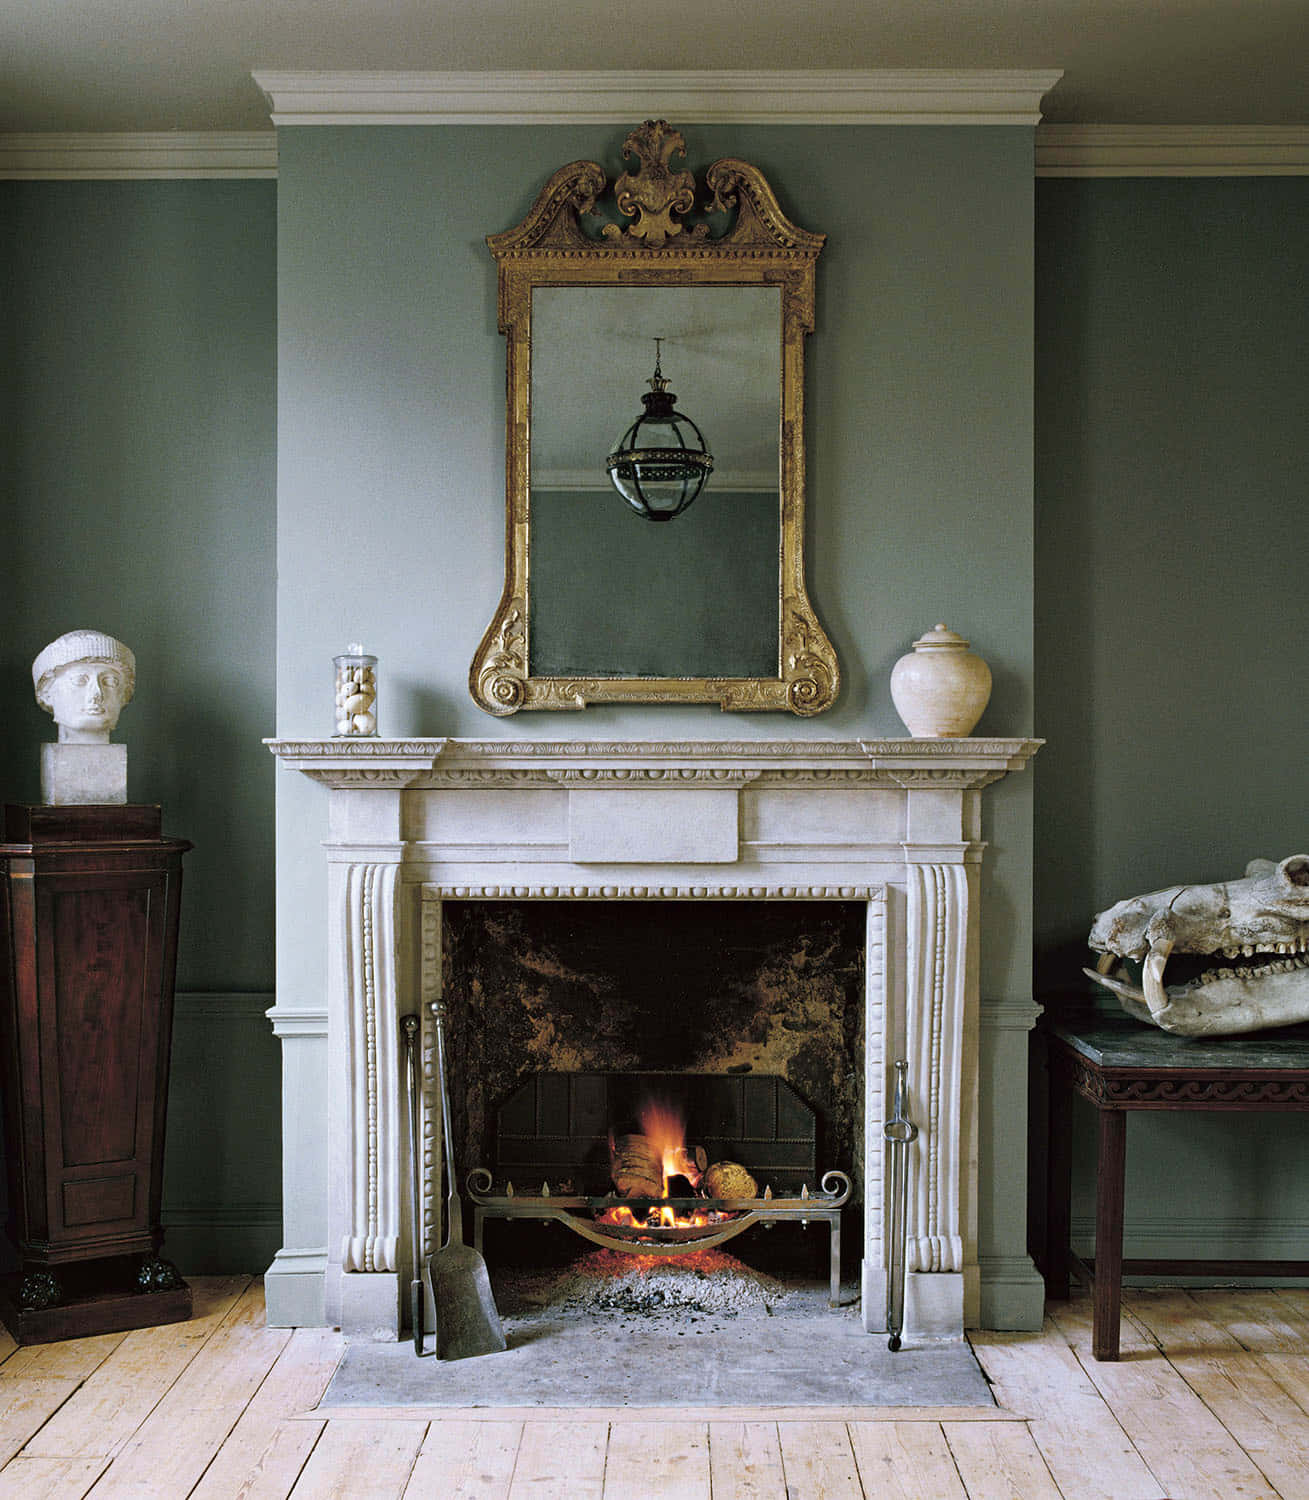 A Fireplace In A Room